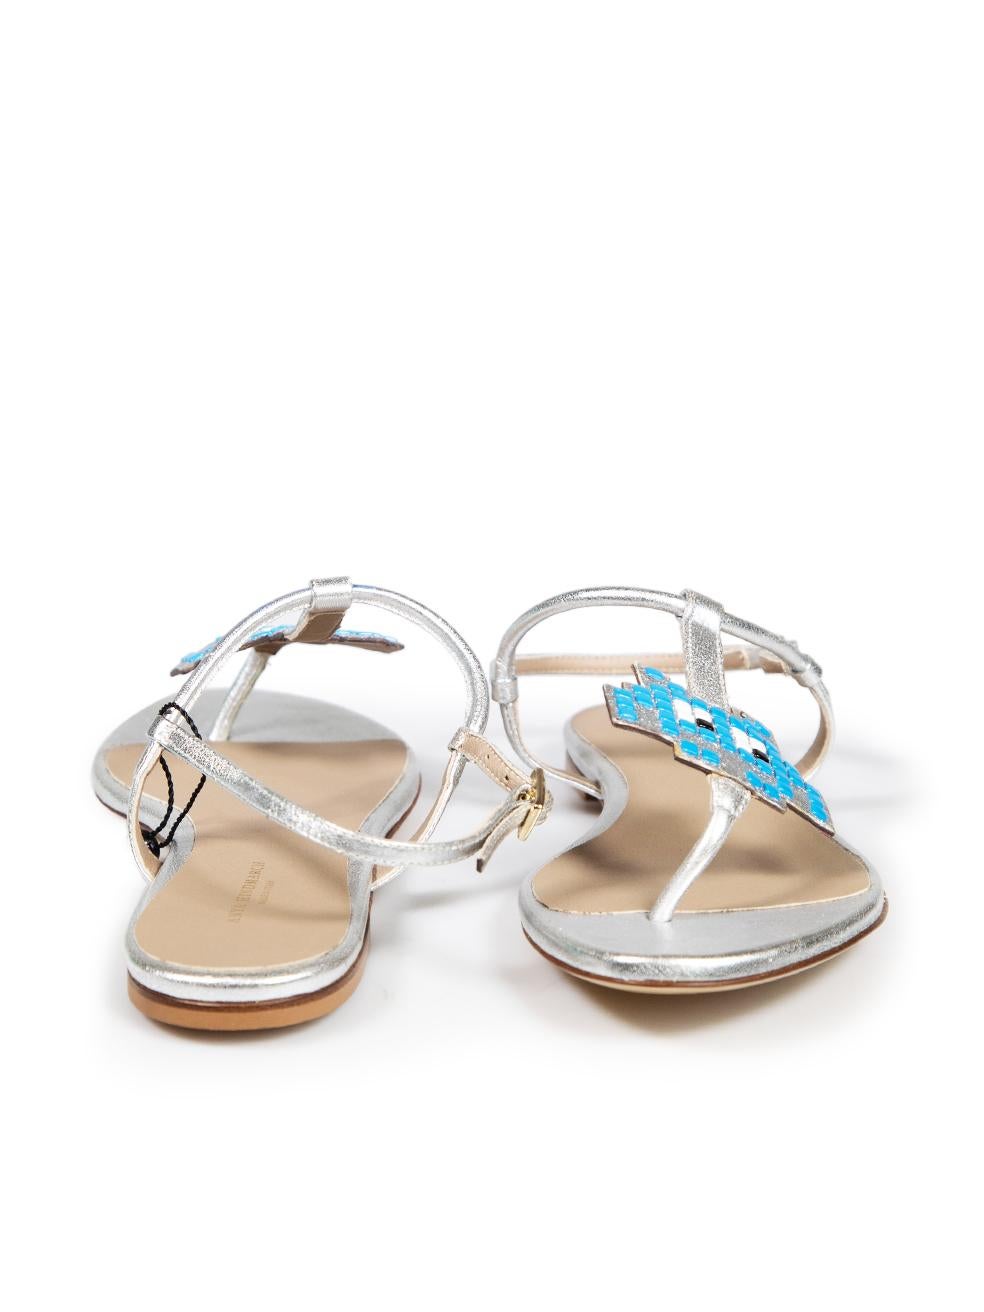 Anya Hindmarch Silver Leather Thong Sandals Size IT 36 In Excellent Condition For Sale In London, GB